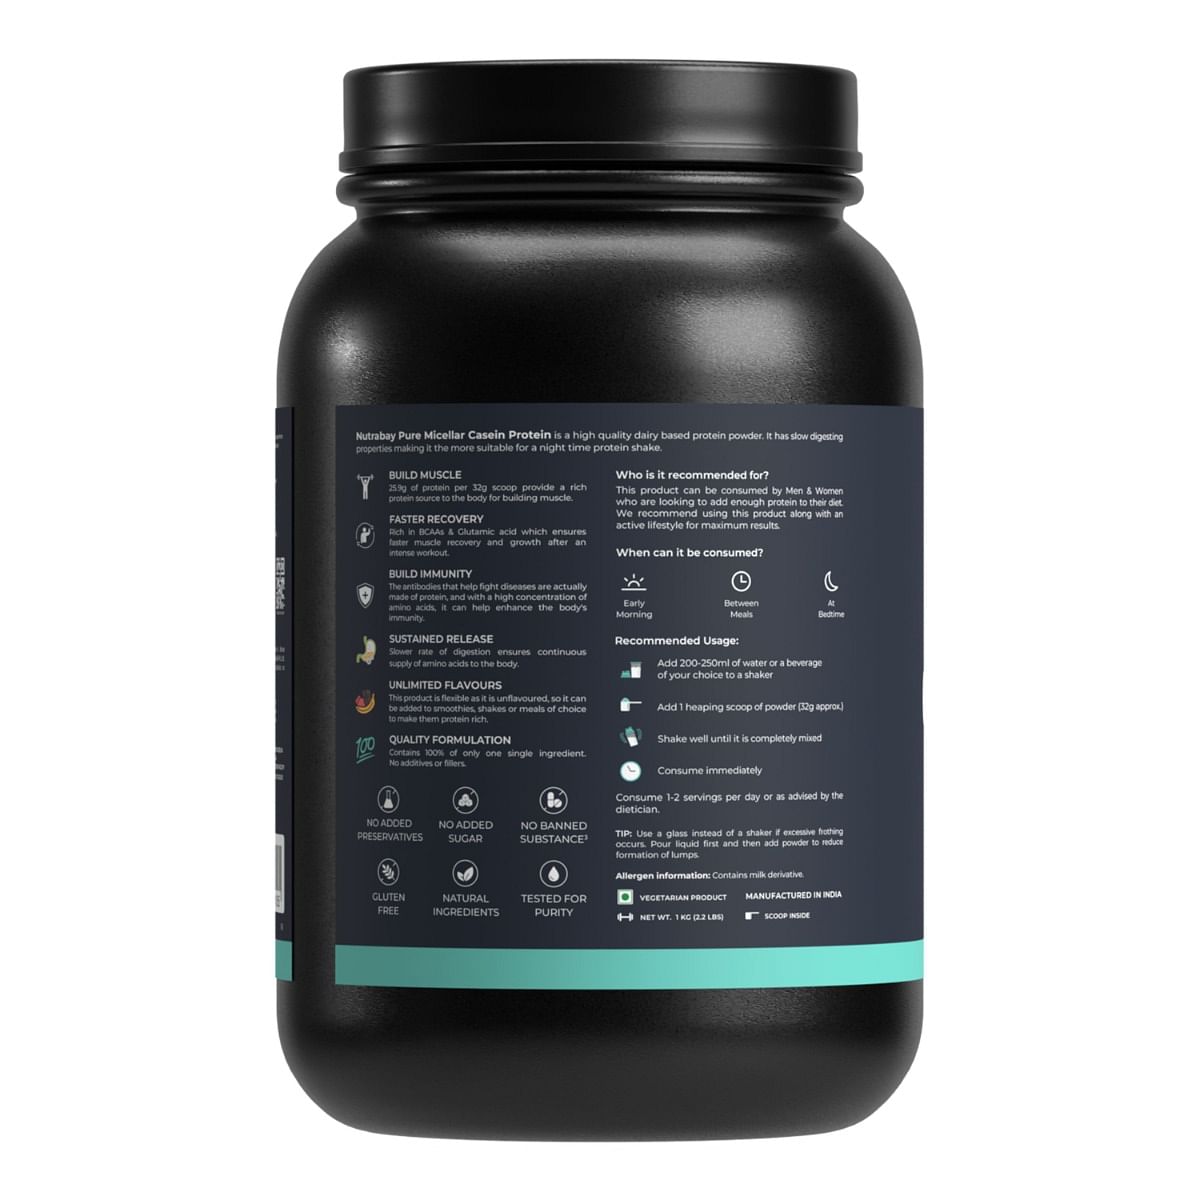 Nutrabay Pure 100 Micellar Casein Protein 1Kg Unflavoured: 25.9G Protein, 5.5G BCAA, Slow Digesting, Anti-Catabolic, Builds Lean Muscle, Aids Recovery.